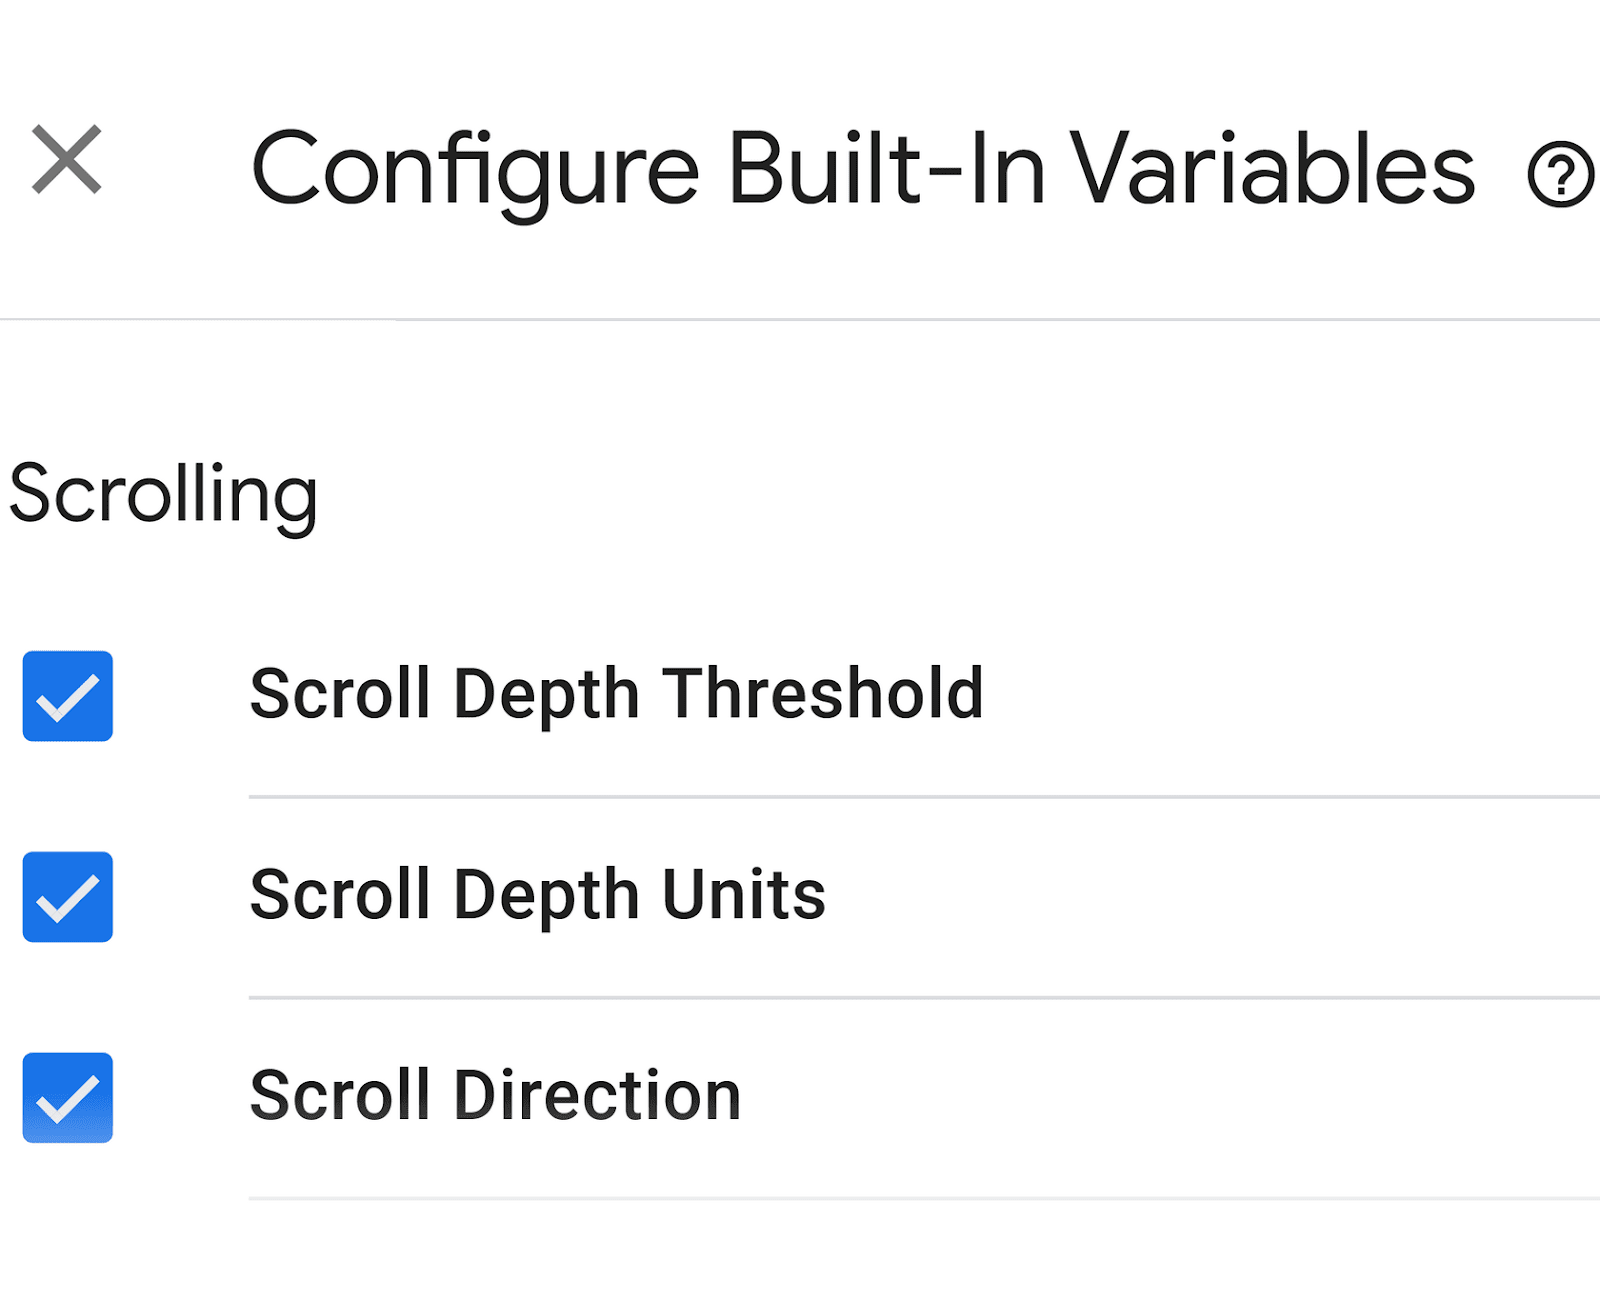 "Scroll Depth Threshold," "Scroll Depth Units," and "Scroll Direction" turned on under “Scrolling” section